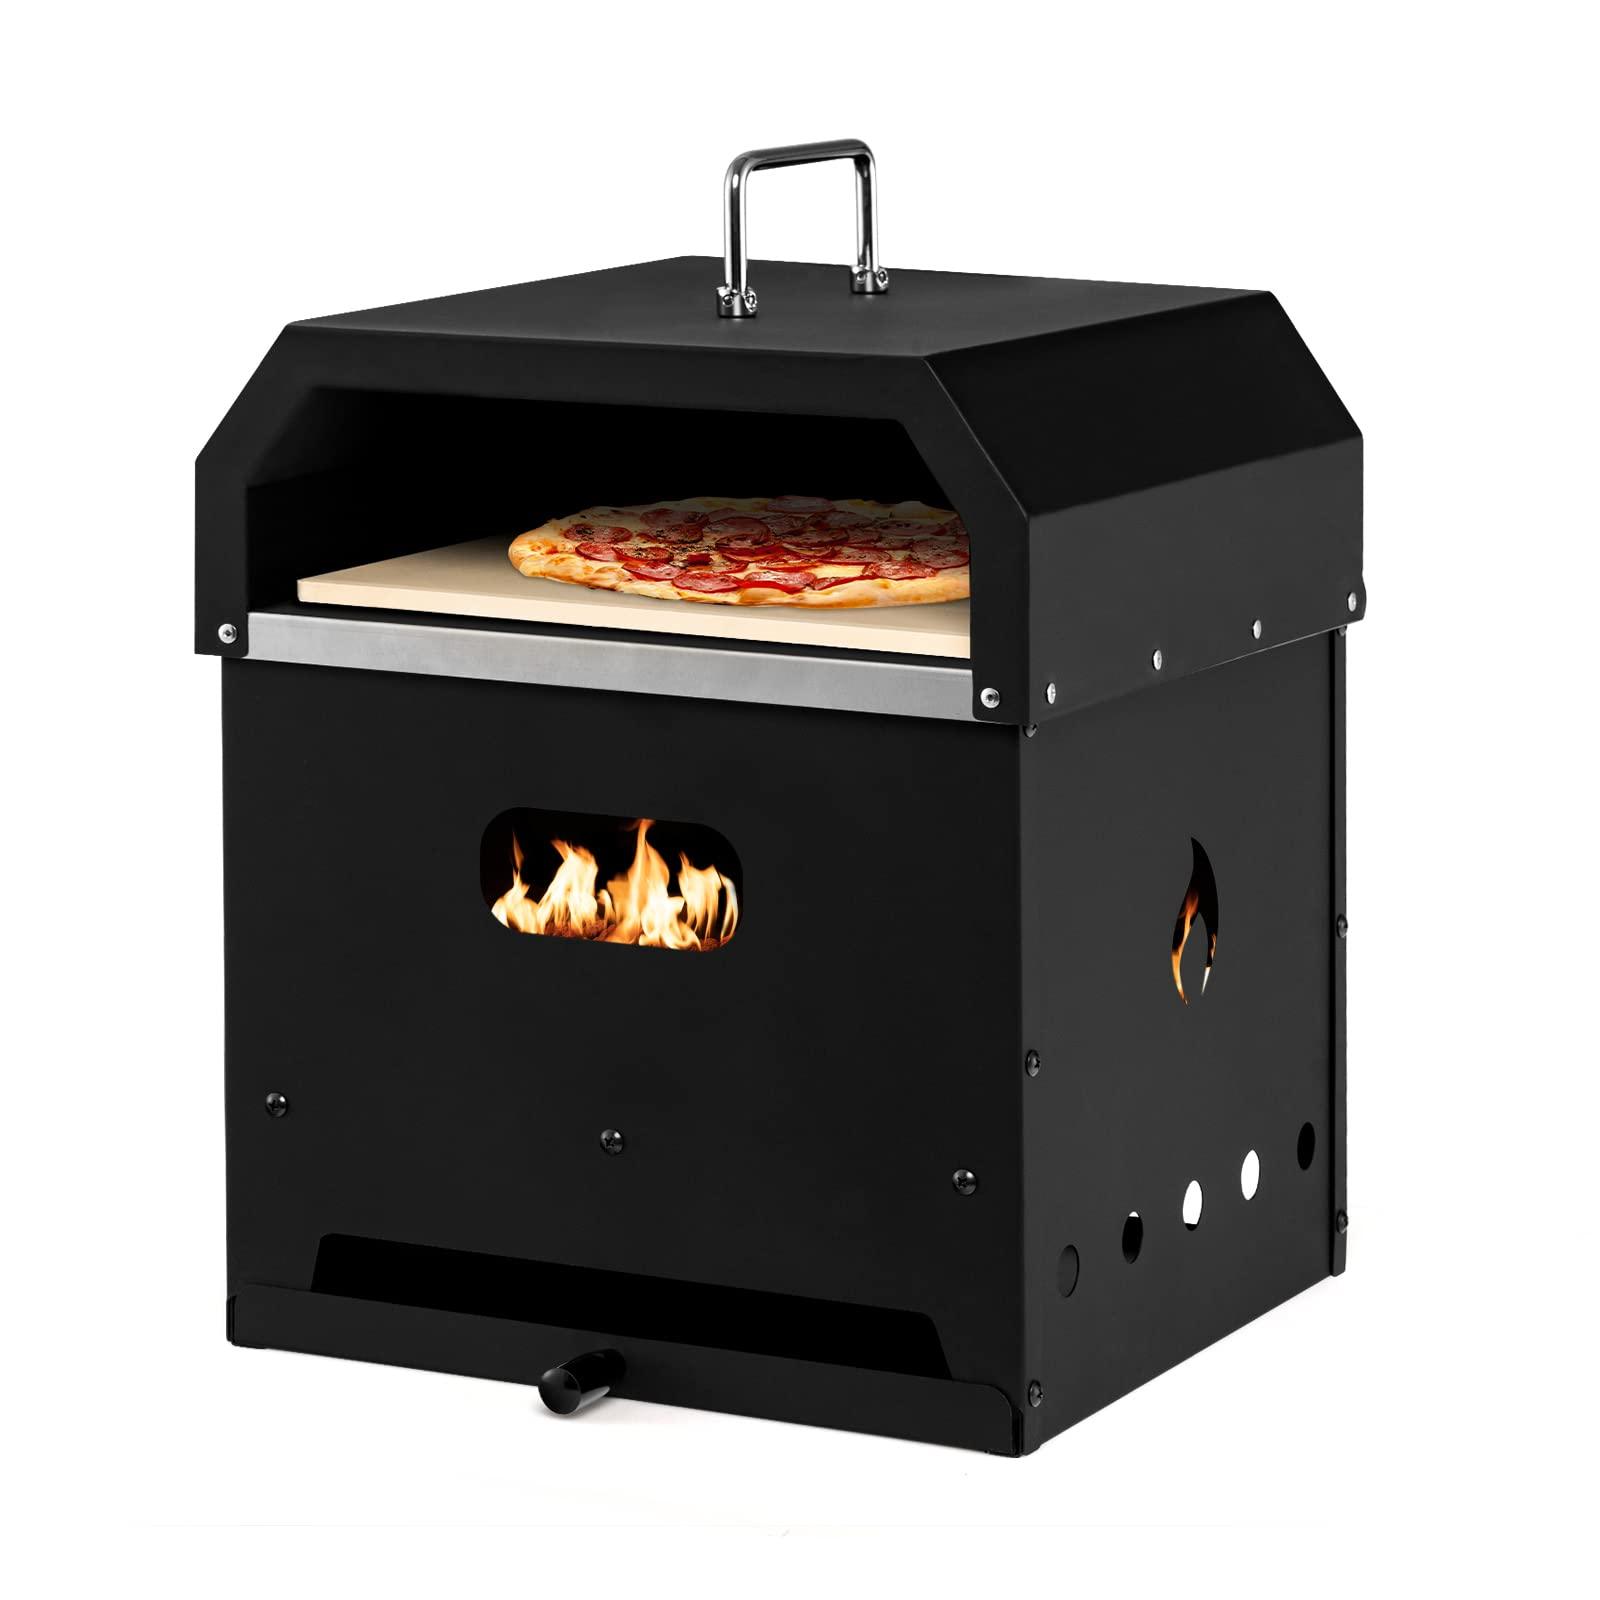 Giantex 4-in-1 Outdoor Pizza Oven, Wood Fired 2-Layer Pizza Maker with Cover, Pizza Stone, Shovel, Grill Grid, Detachable Grill Oven Fire Pit Pizza Ovens for Outside Backyard BBQ - CookCave